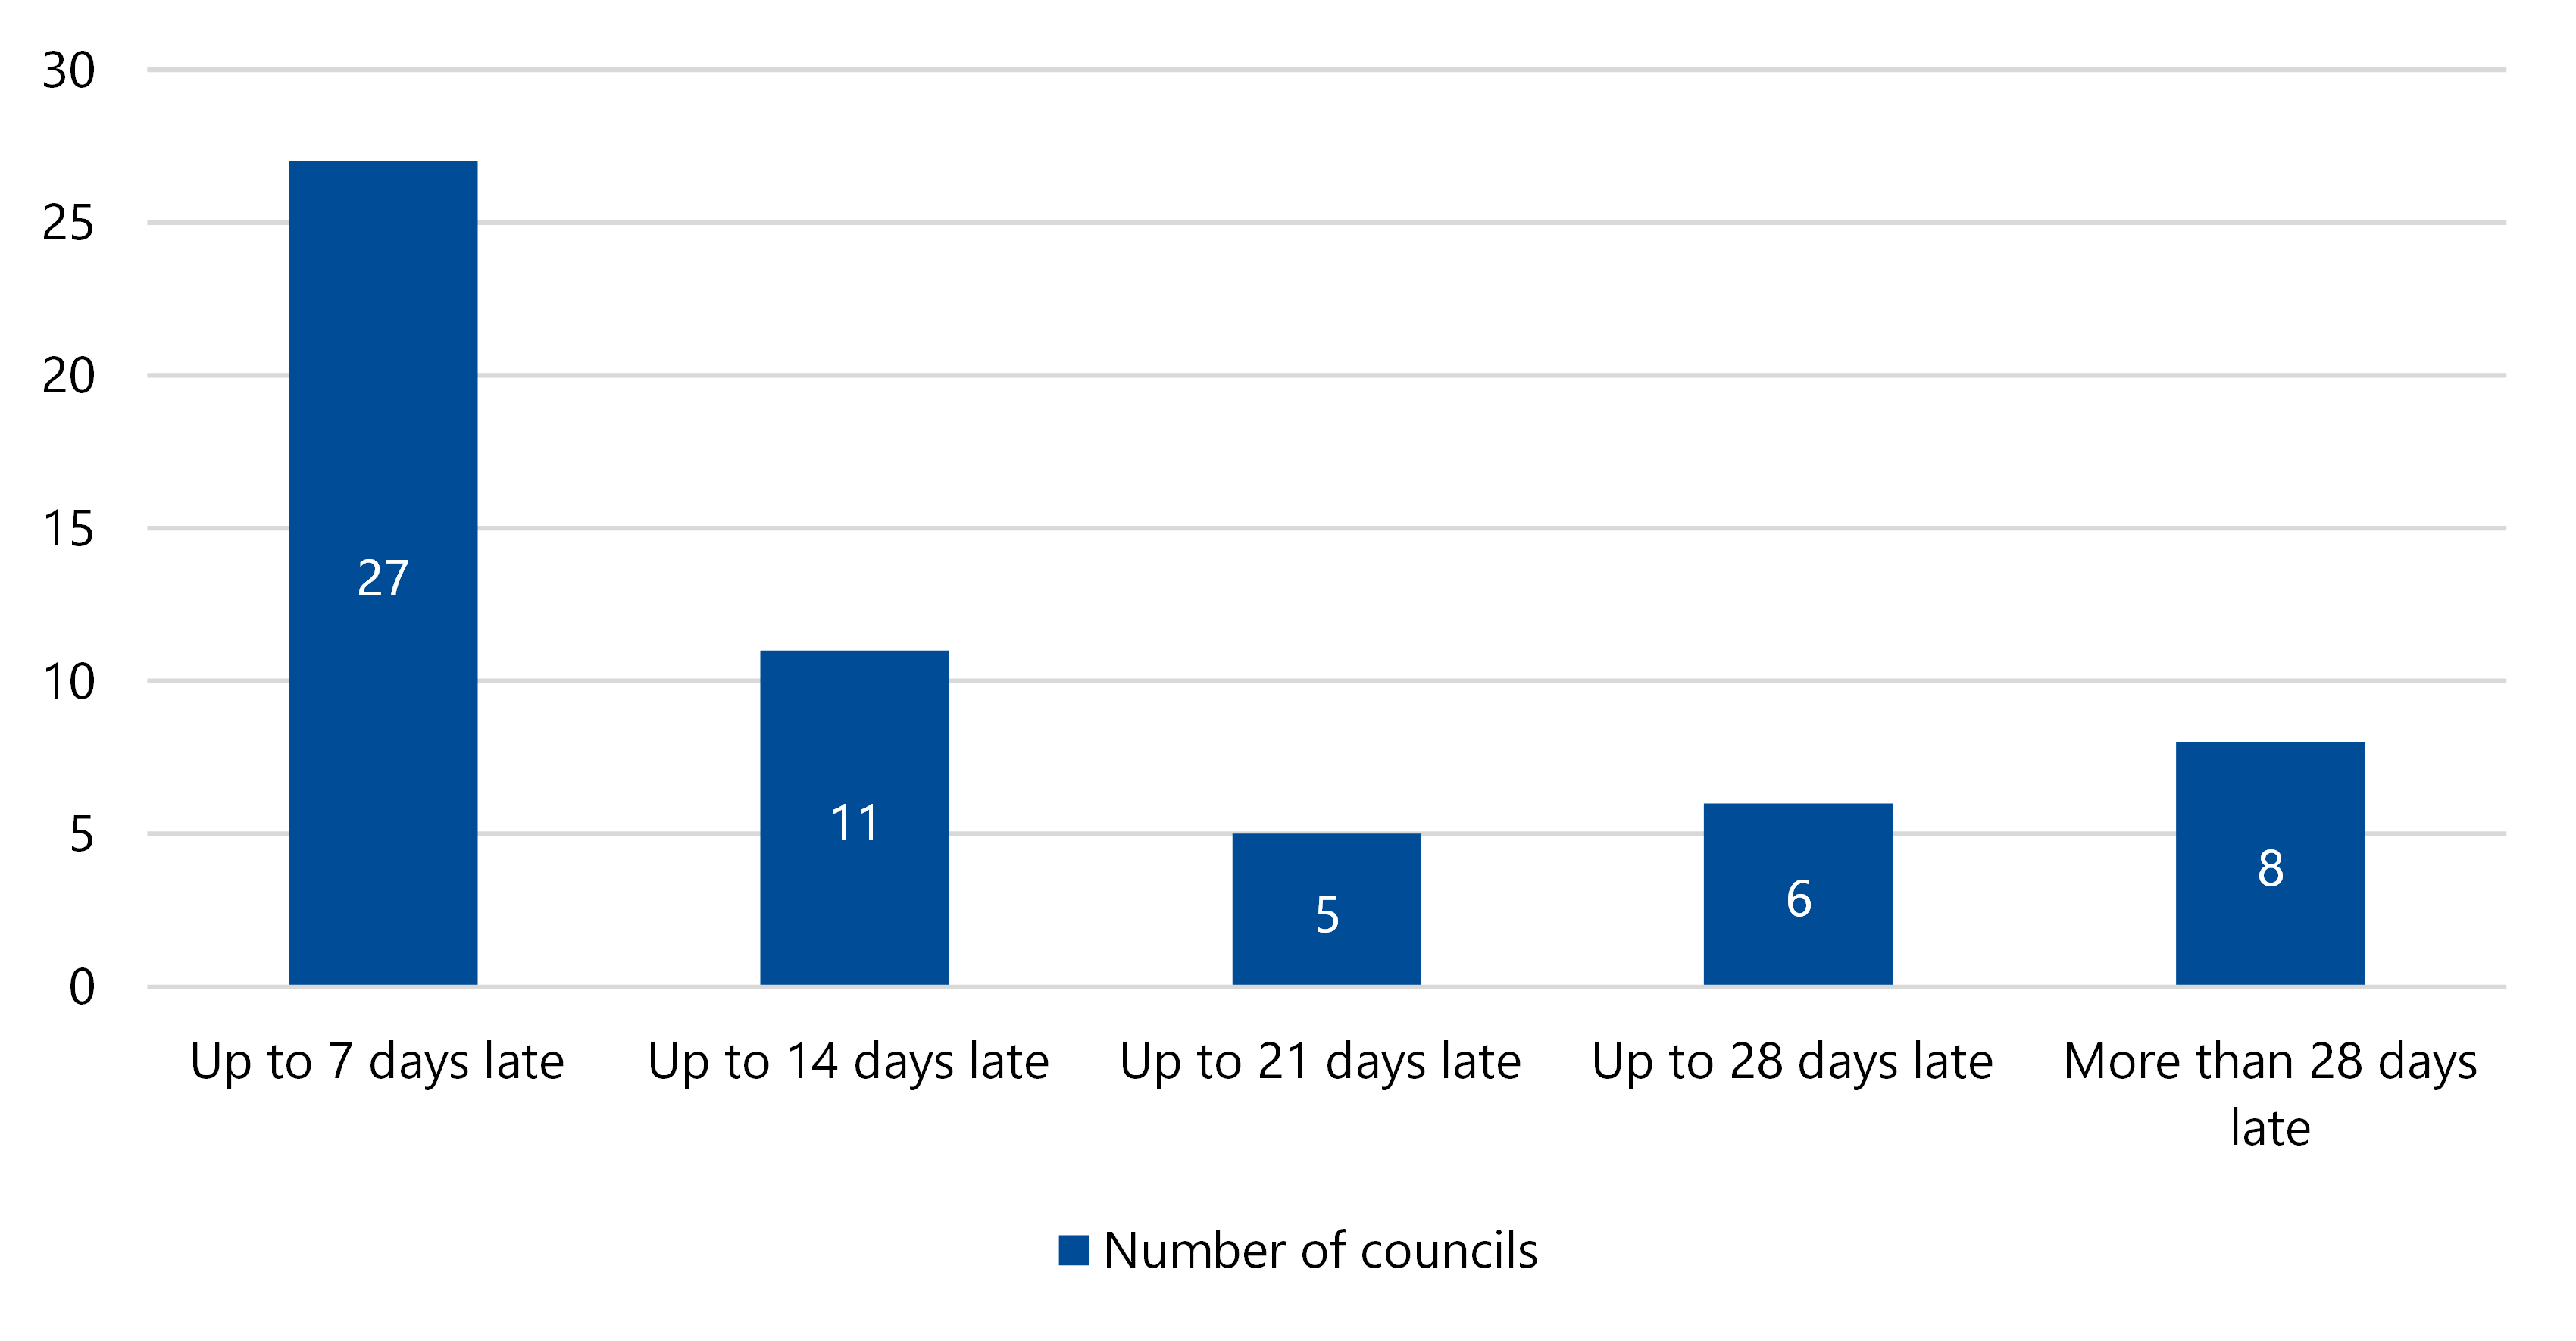 Figure 3 is a bar chart showing that 17 councils submitted their draft financial reports up to 7 days late. Eleven submitted them late by up to 7 days, 5 by up to 21 days, 6 by up to 28 days and 8 by more than 28 days.